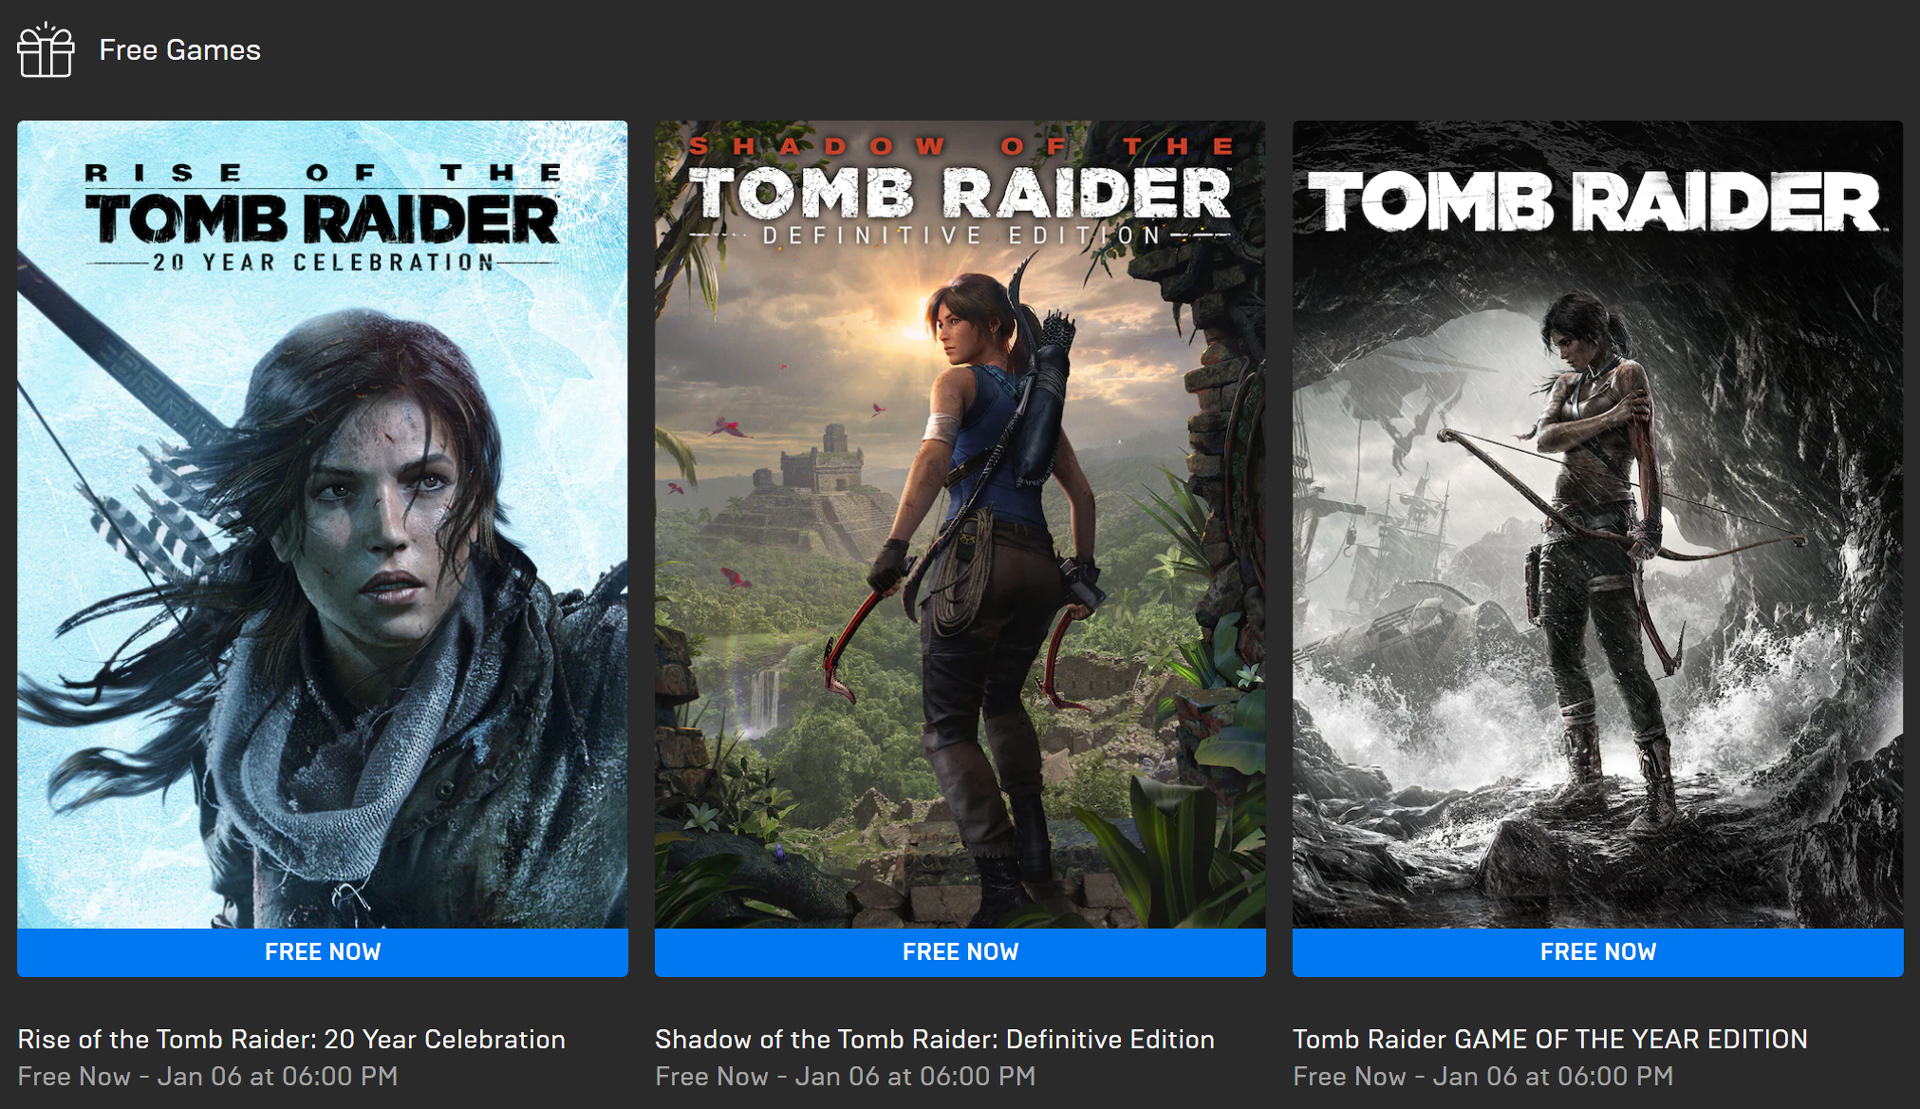 Download Tomb Raider Games for FREE